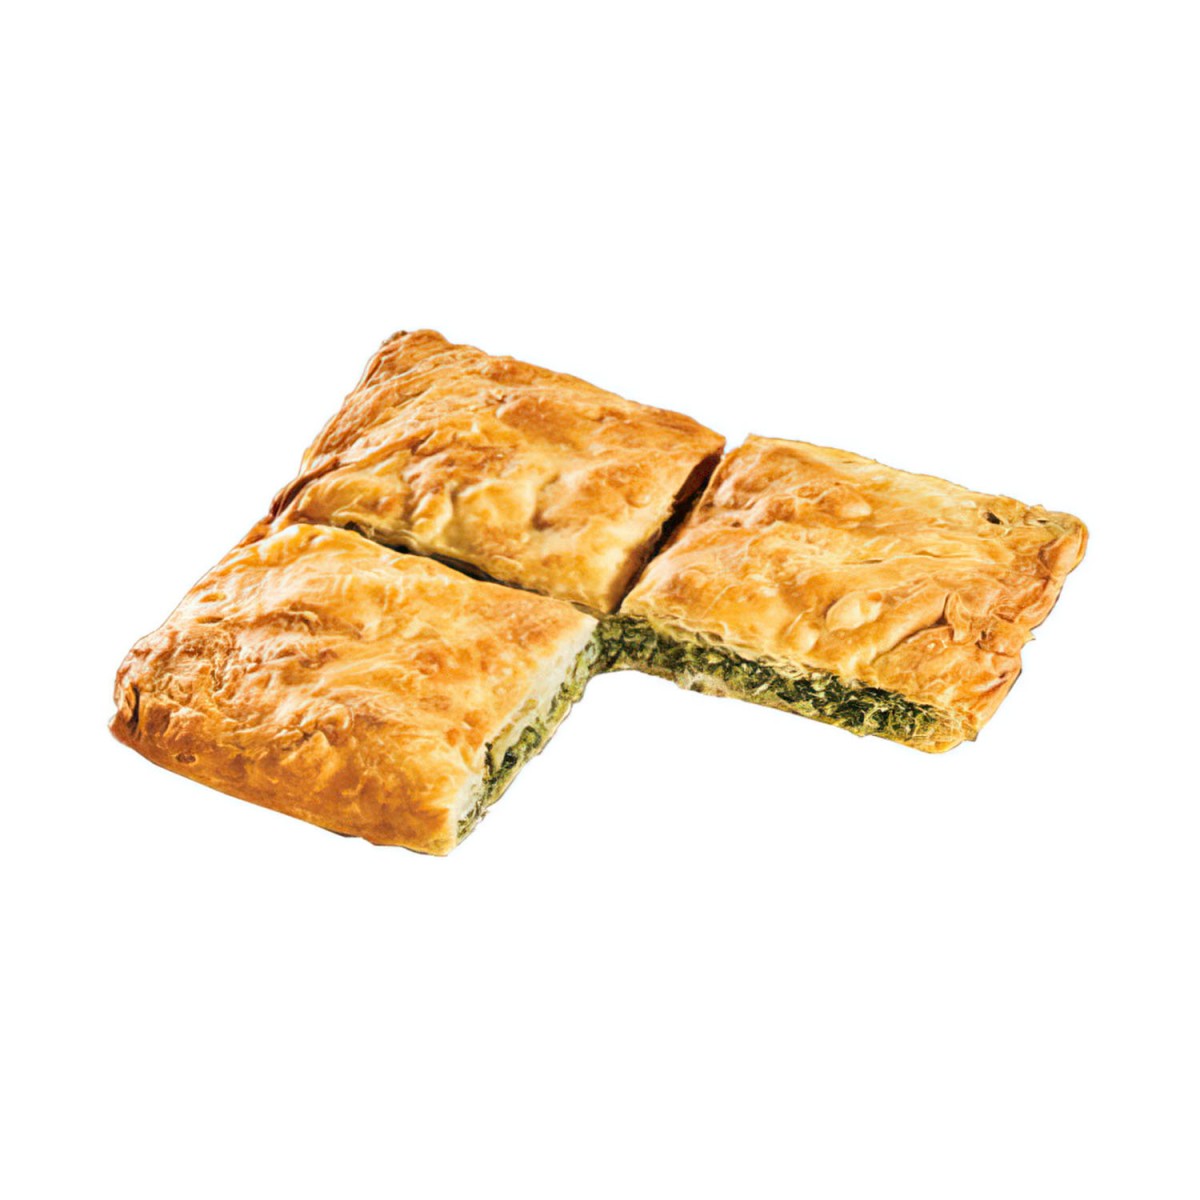 Spinach and Feta pie